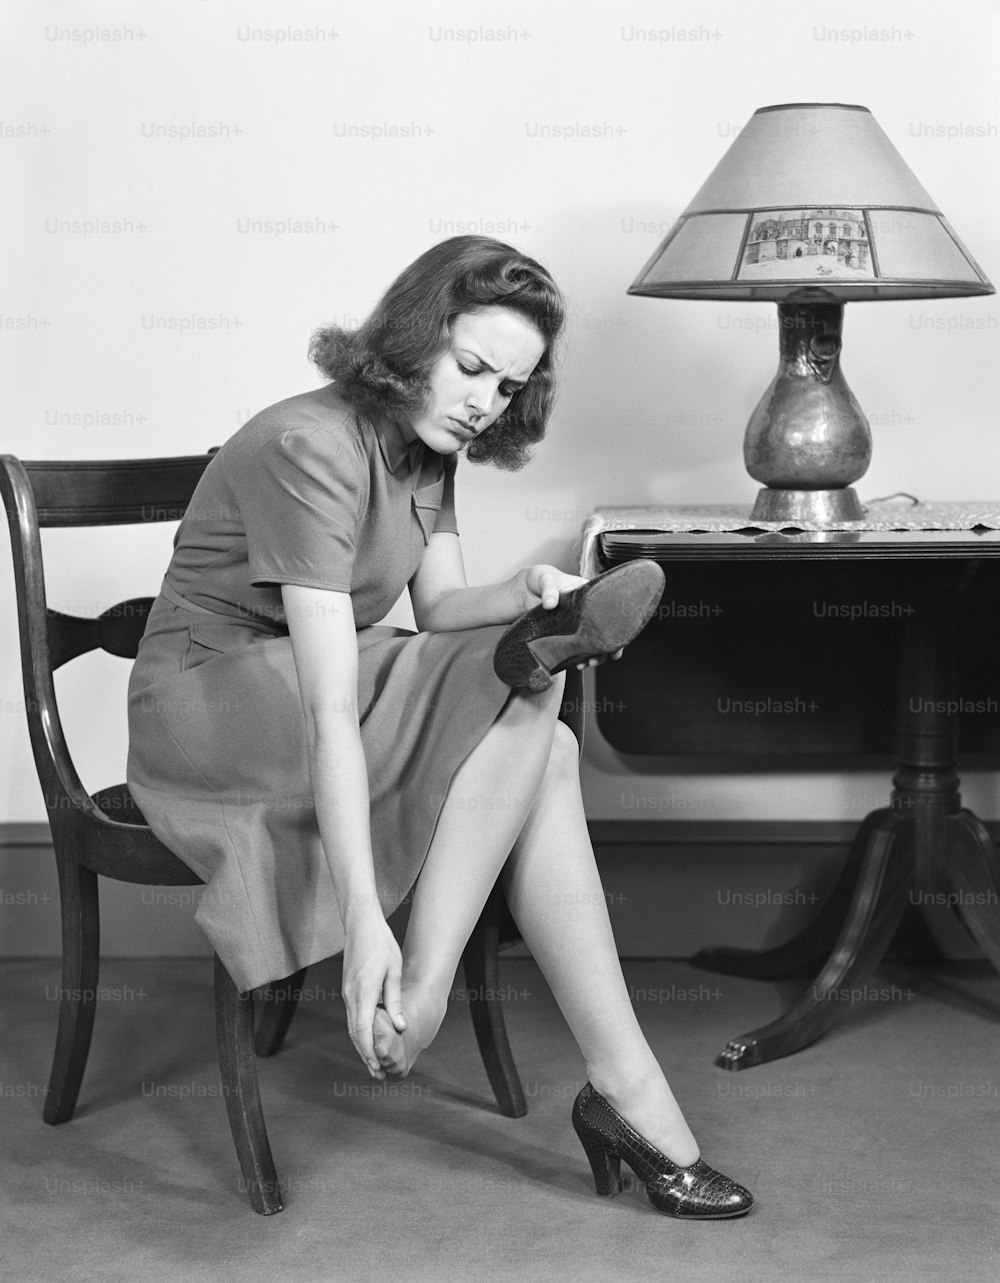 UNITED STATES - CIRCA 1950s:  Woman sitting in chair, rubbing her feet.